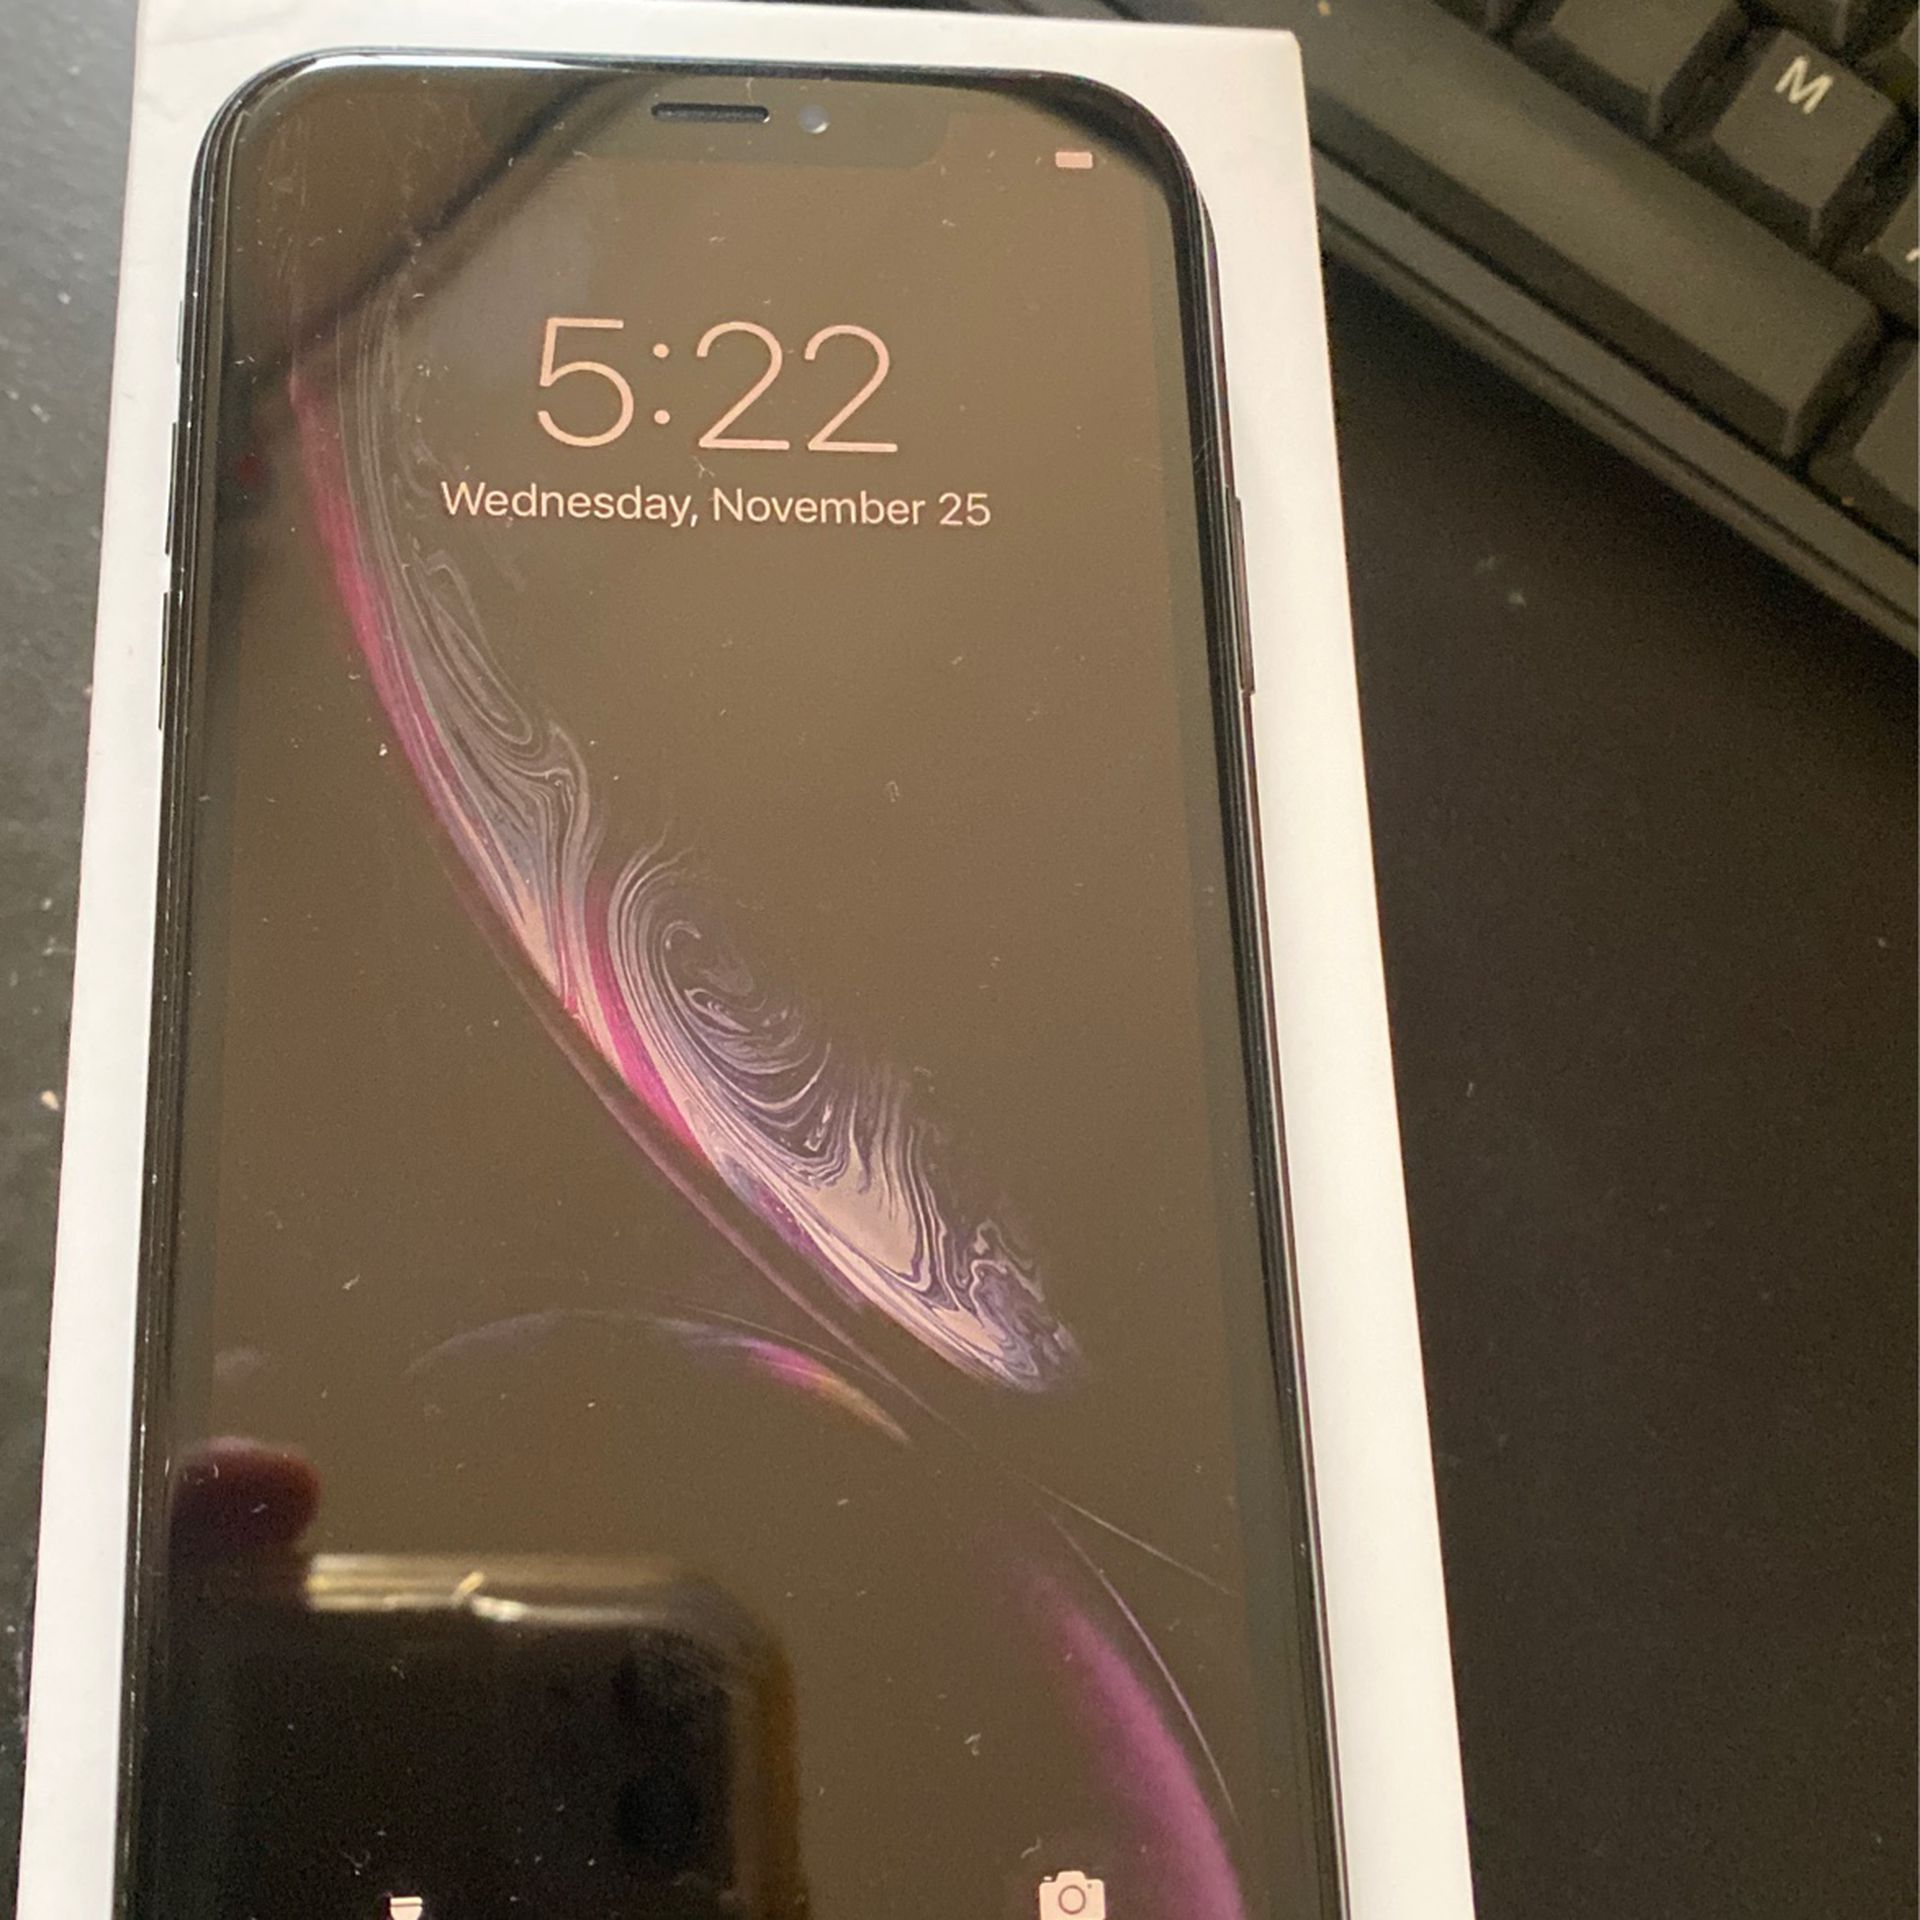 iPhone XR Factory Unlocked To Any Carrier 64 GB Excellent Condition Comes With Original Box Fully Paid Off